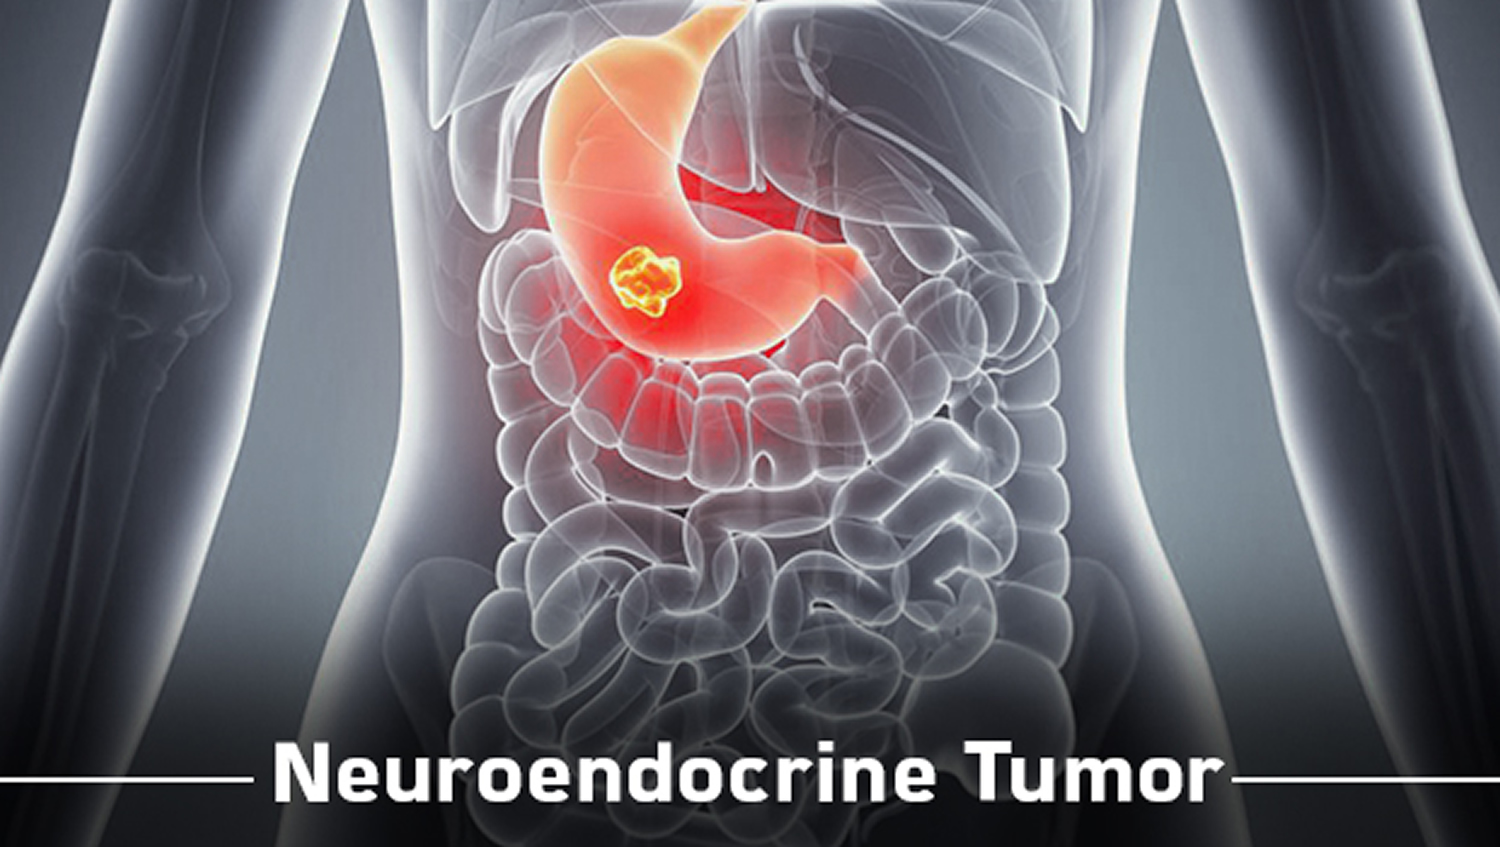 neuroendocrine cancer can be cured